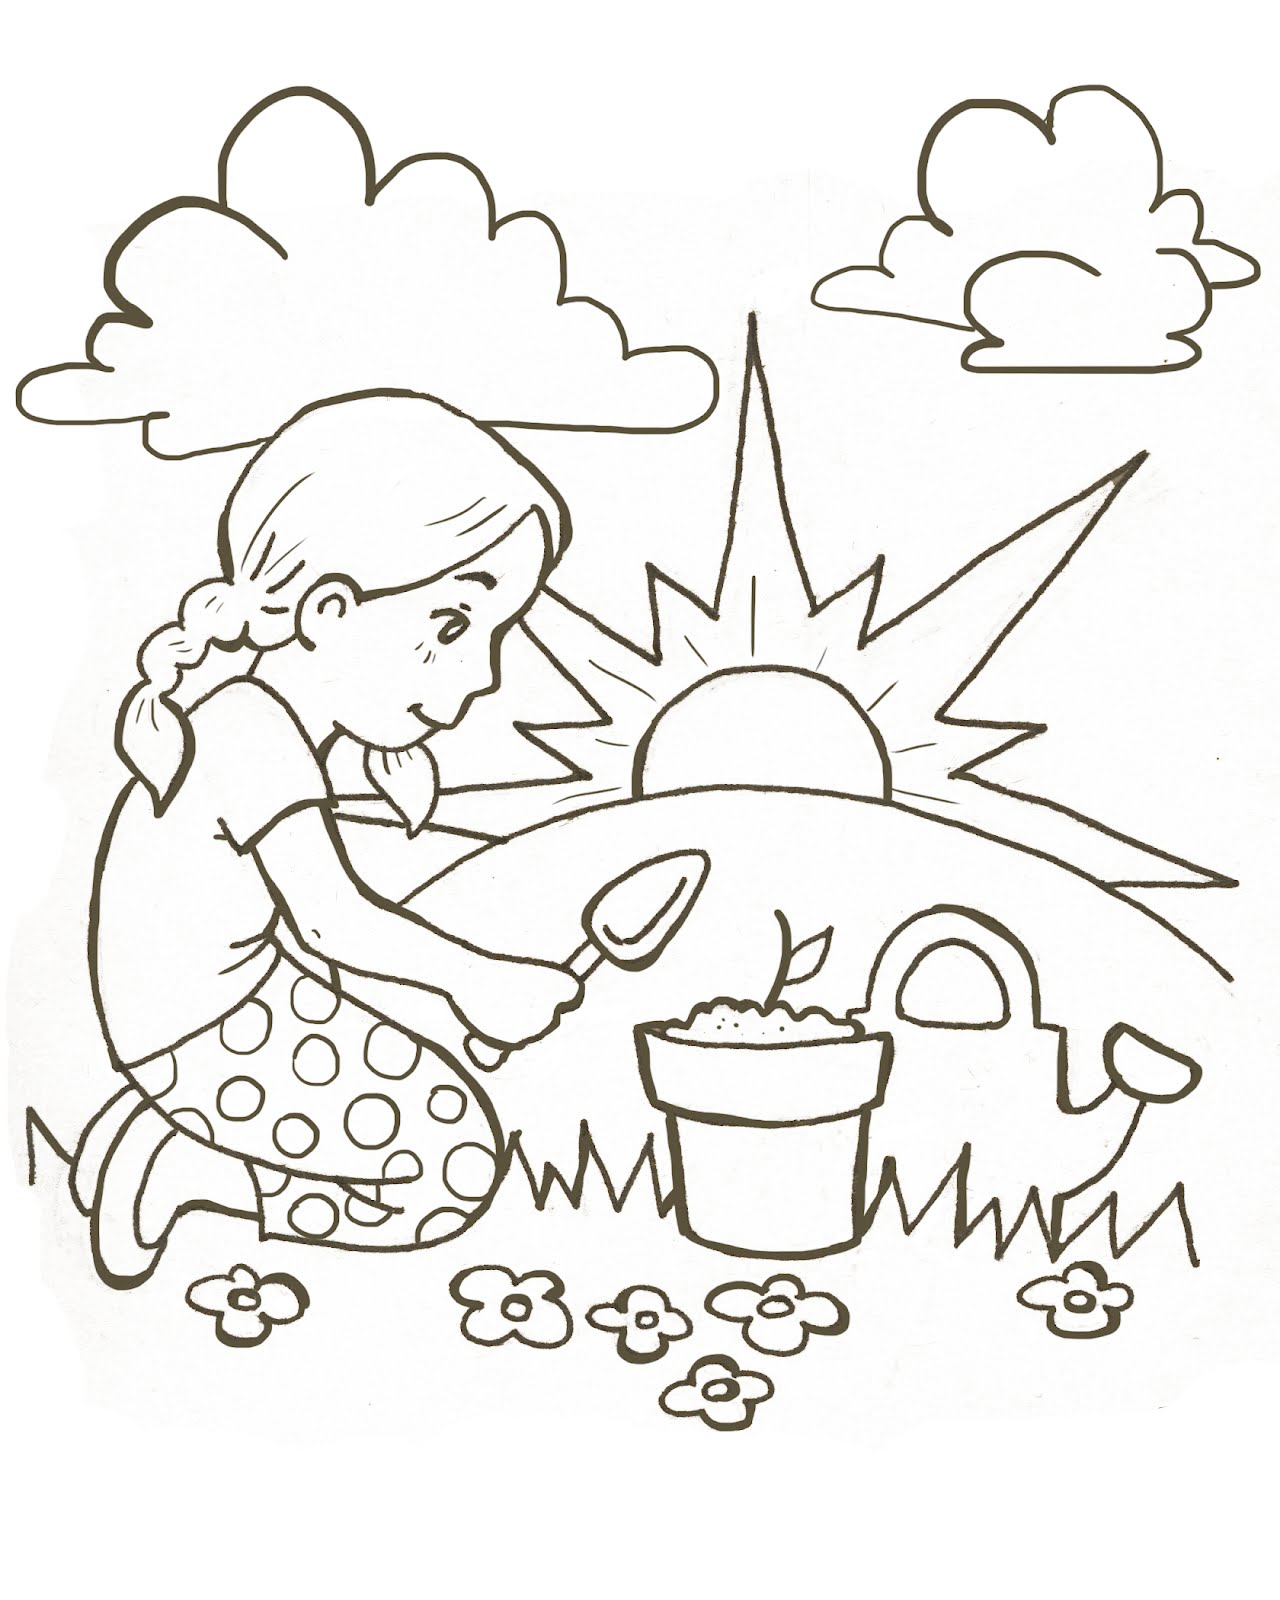 Faith Coloring Pages at GetColorings.com | Free printable colorings